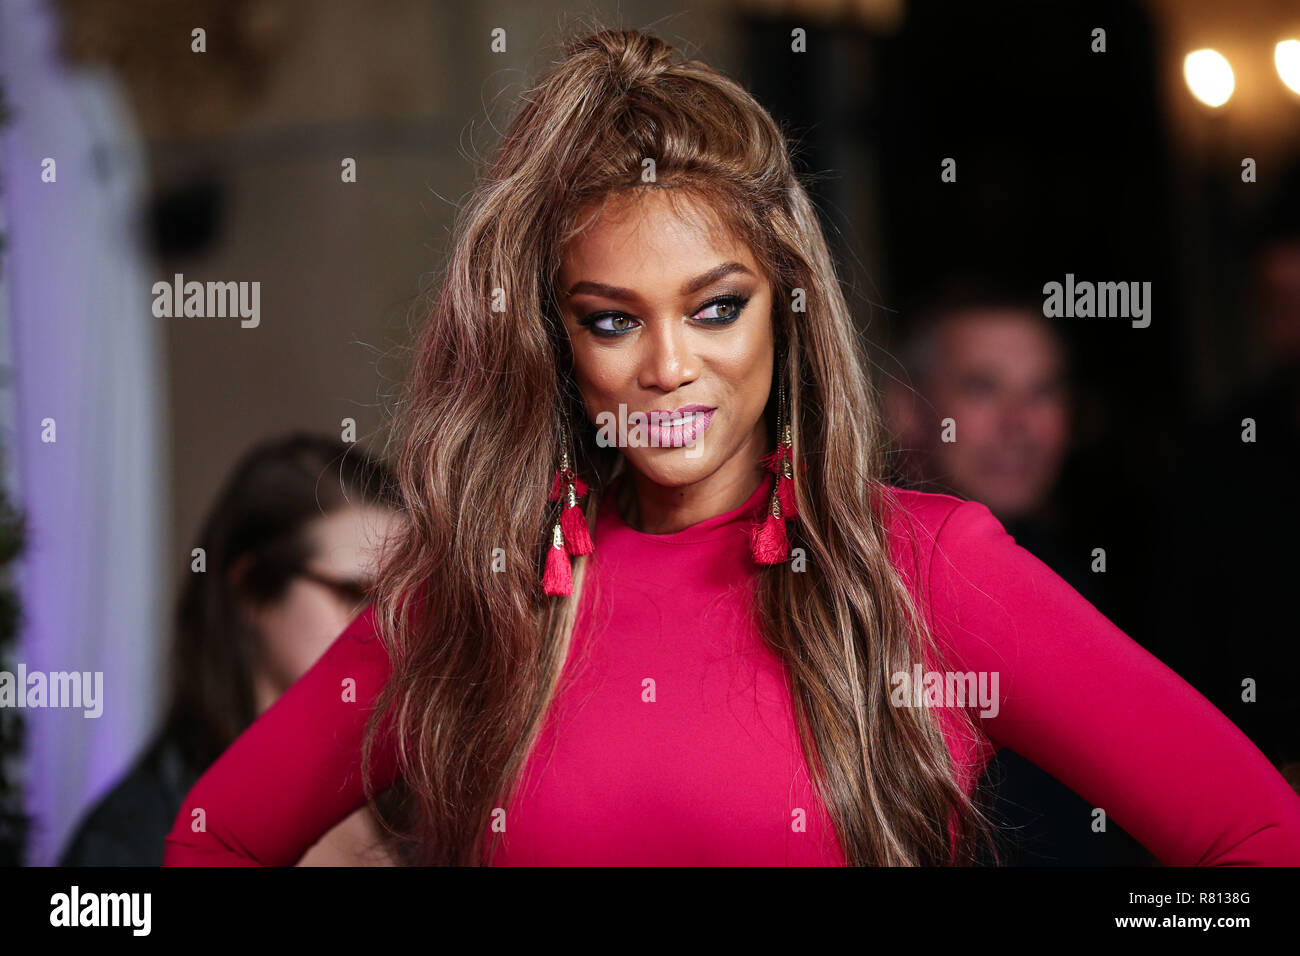 HOLLYWOOD, LOS ANGELES, CA, USA - NOVEMBER 27: Tyra Banks at the World Premiere Of Freeform's 'Life-Size 2' held at The Hollywood Roosevelt on November 27, 2018 in Hollywood, Los Angeles, California, United States. (Photo by Xavier Collin/Image Press Agency) Stock Photo